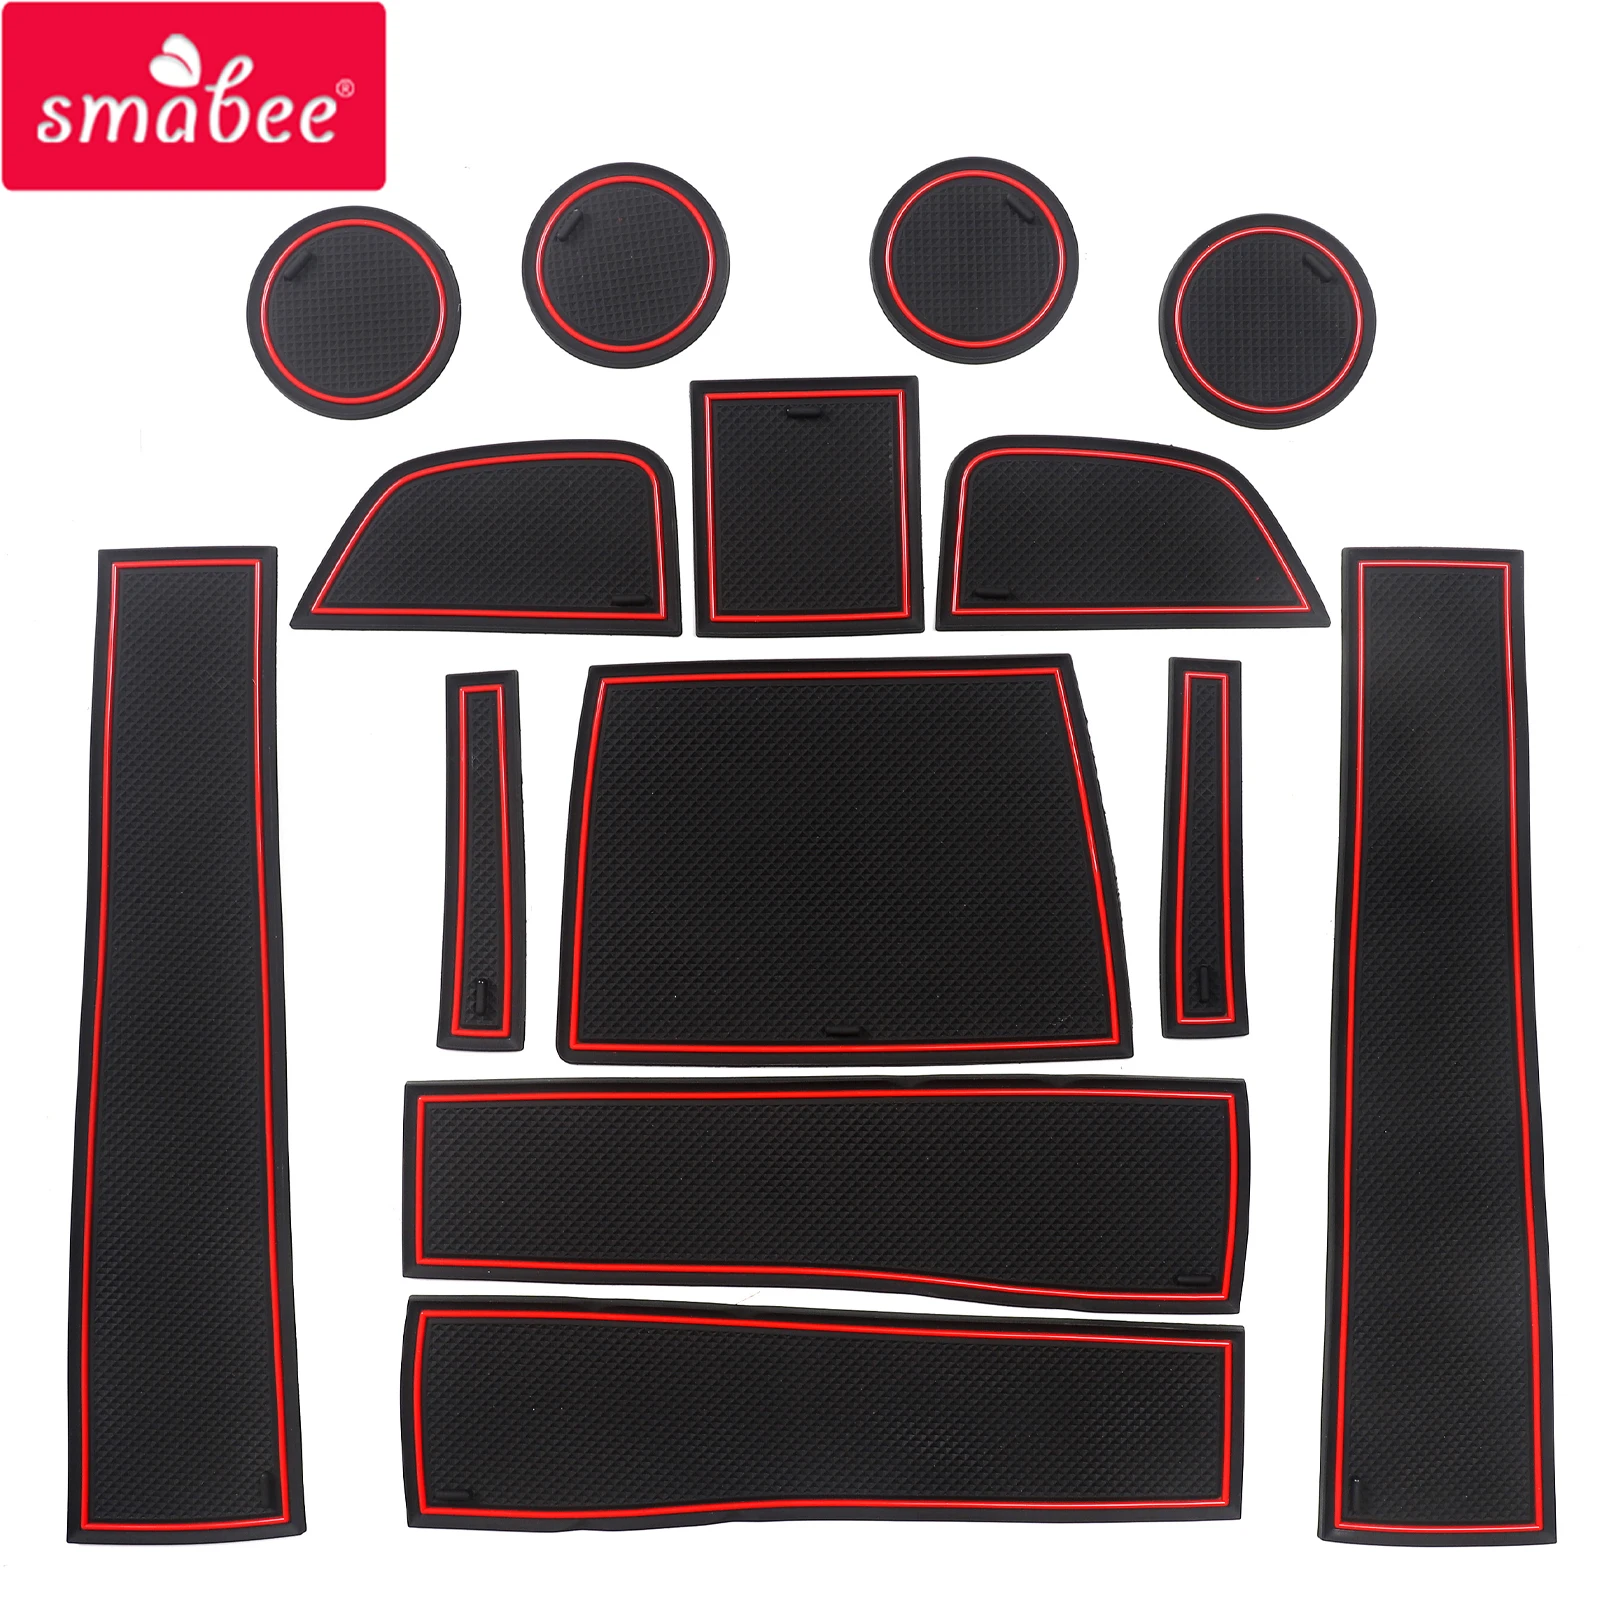 

Smabee Gate Slot Cup Mat for Renault XM3 2020 - 2022 Interior Accessories Anti-Slip Rubber Coaster Non-Slip Door Groove Pad